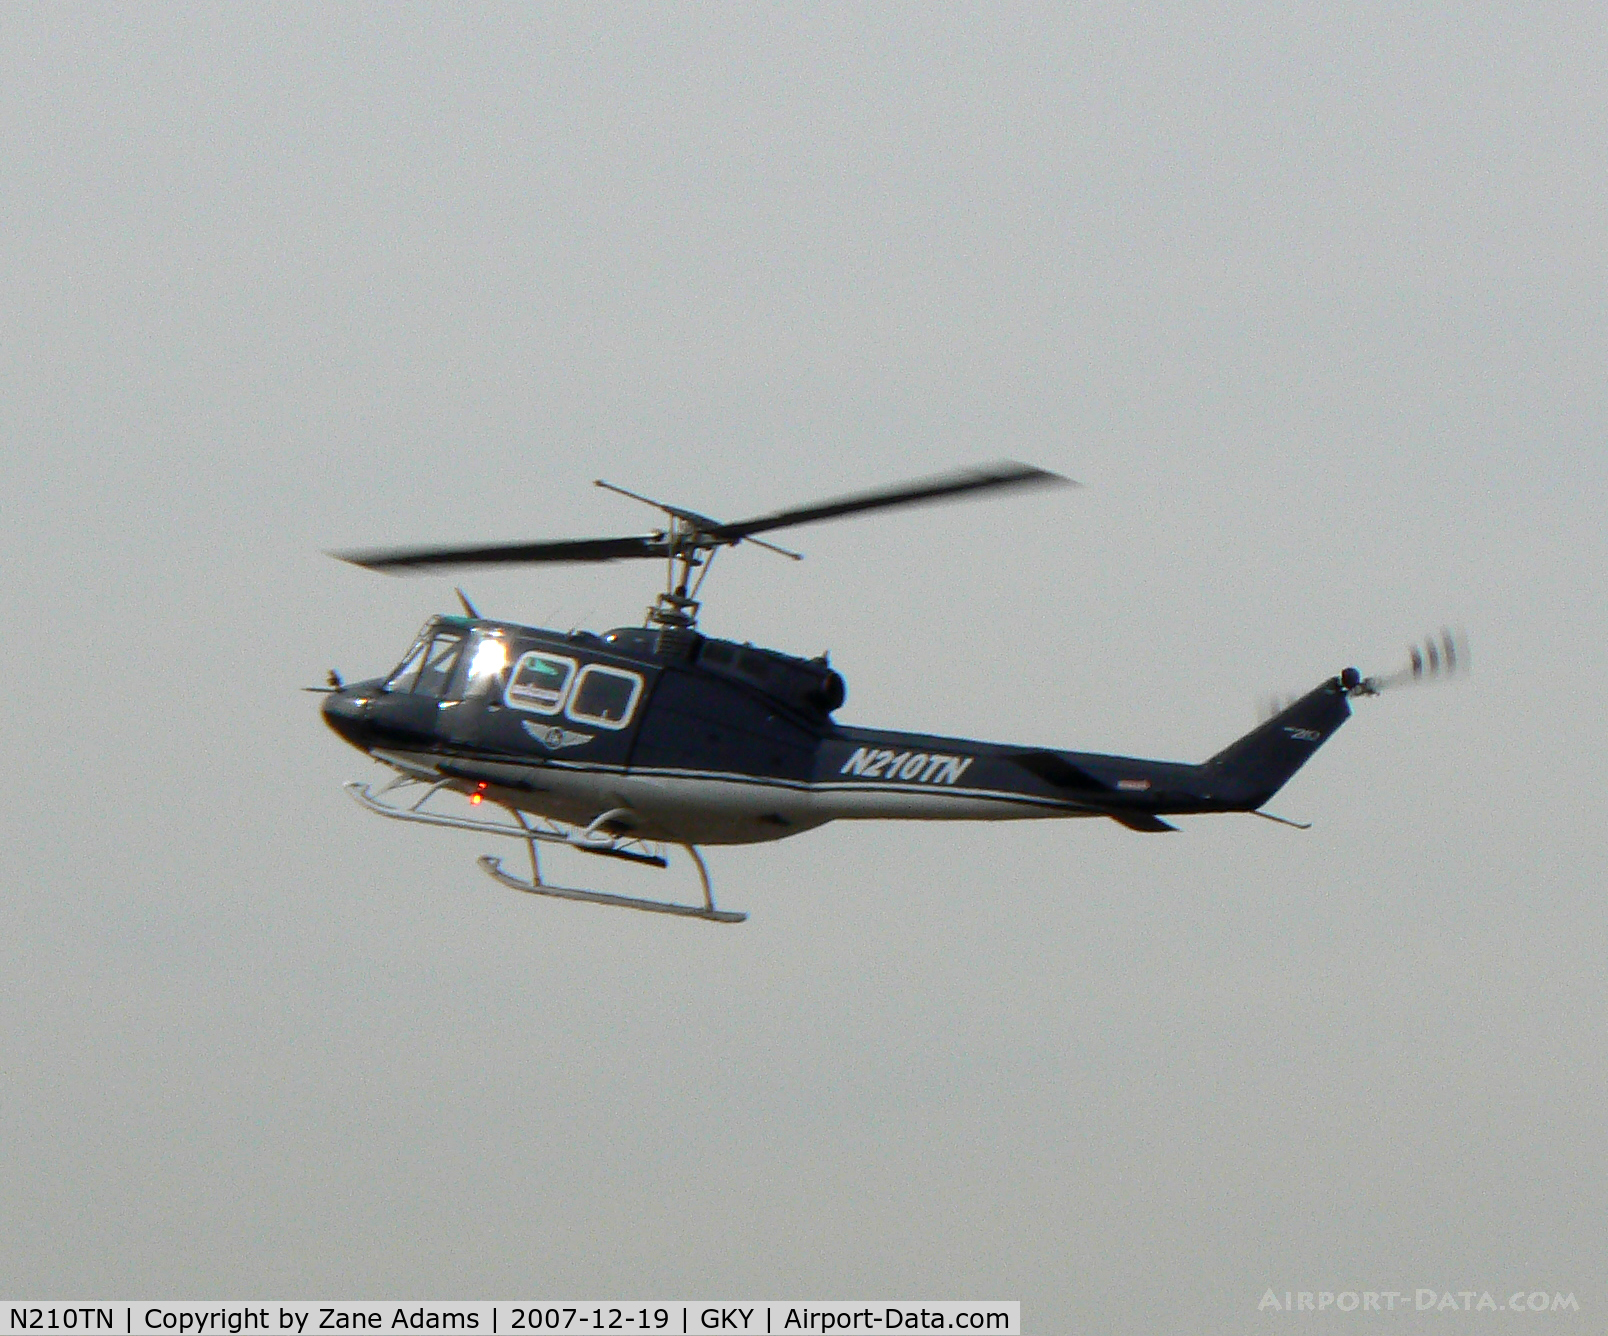 N210TN, 2005 Bell 210 C/N 21001, At Bell Helicopter Flight Test